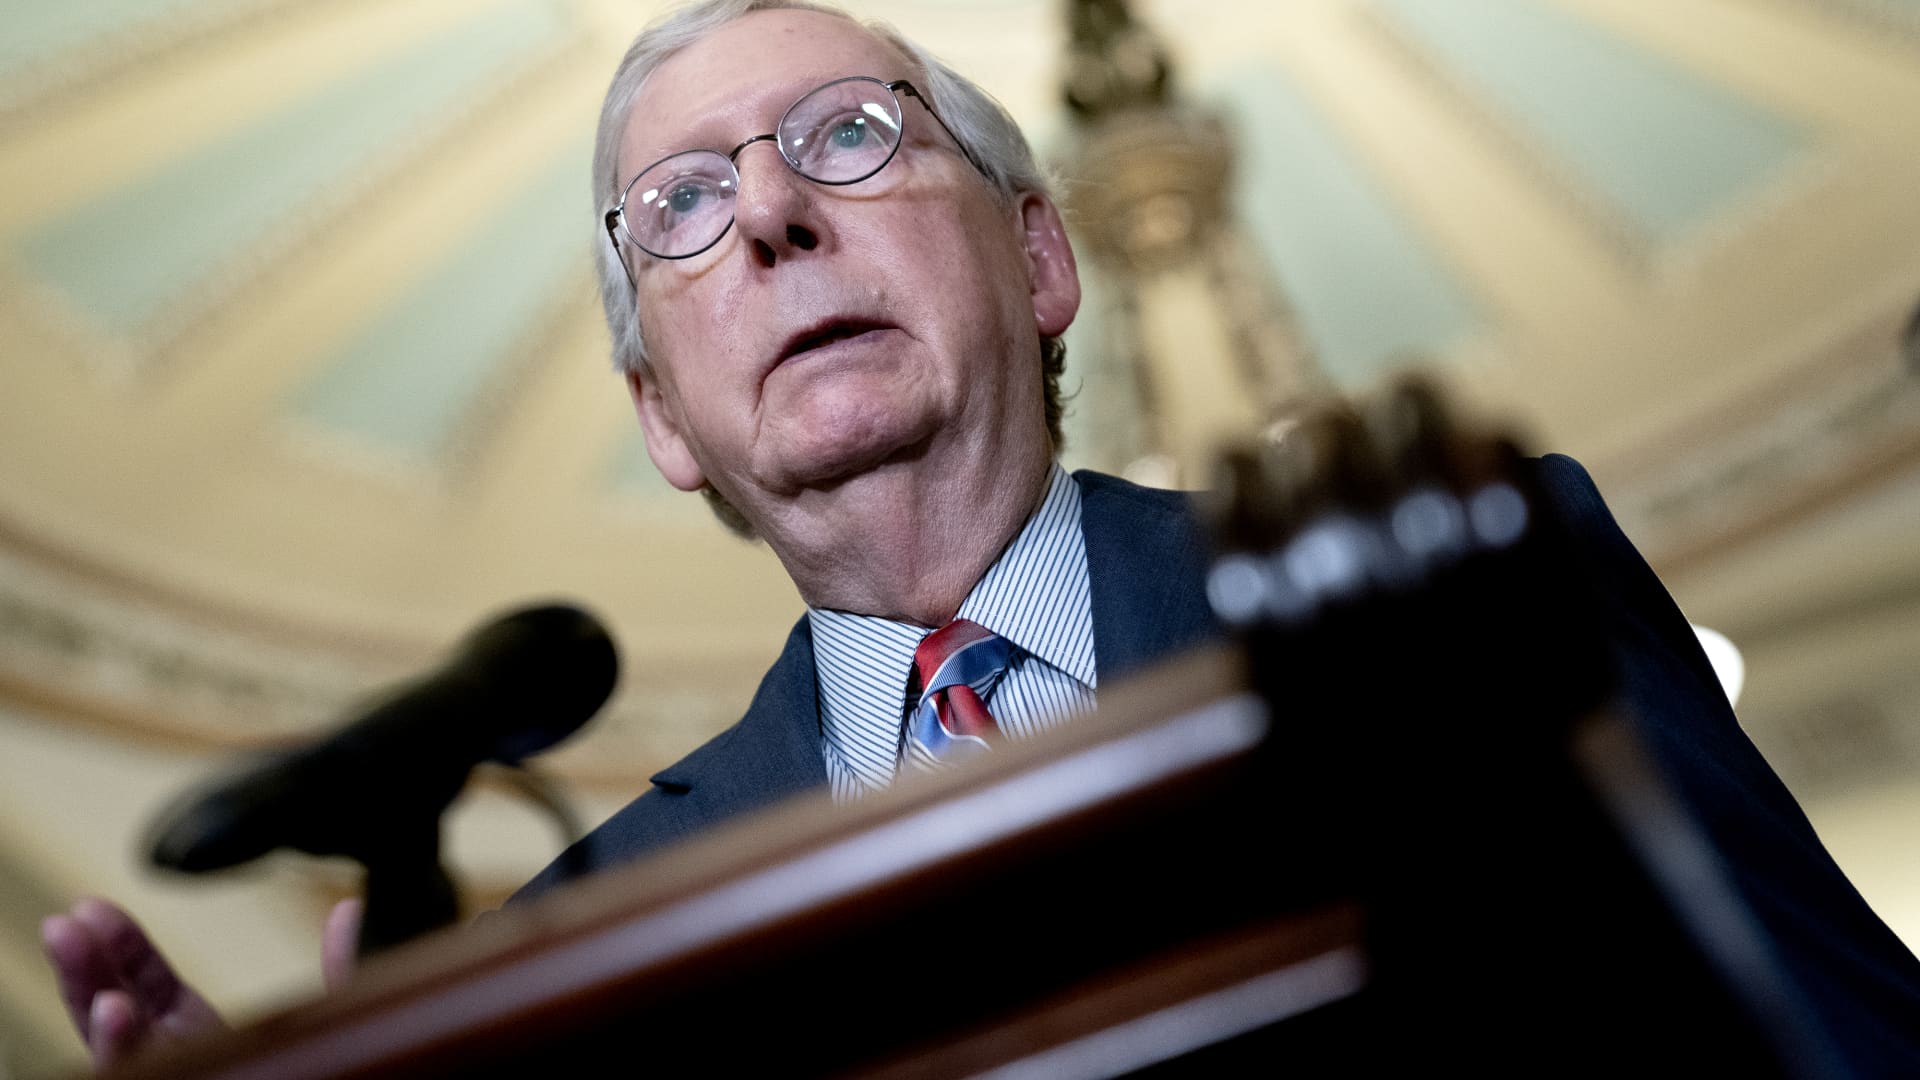 Senate Minority Leader Mitch McConnell, a Republican from Kentucky, speaks during a news conference following Senate Republican policy luncheons at the U.S. Capitol in Washington, D.C., on Tuesday, Sept. 14, 2021.